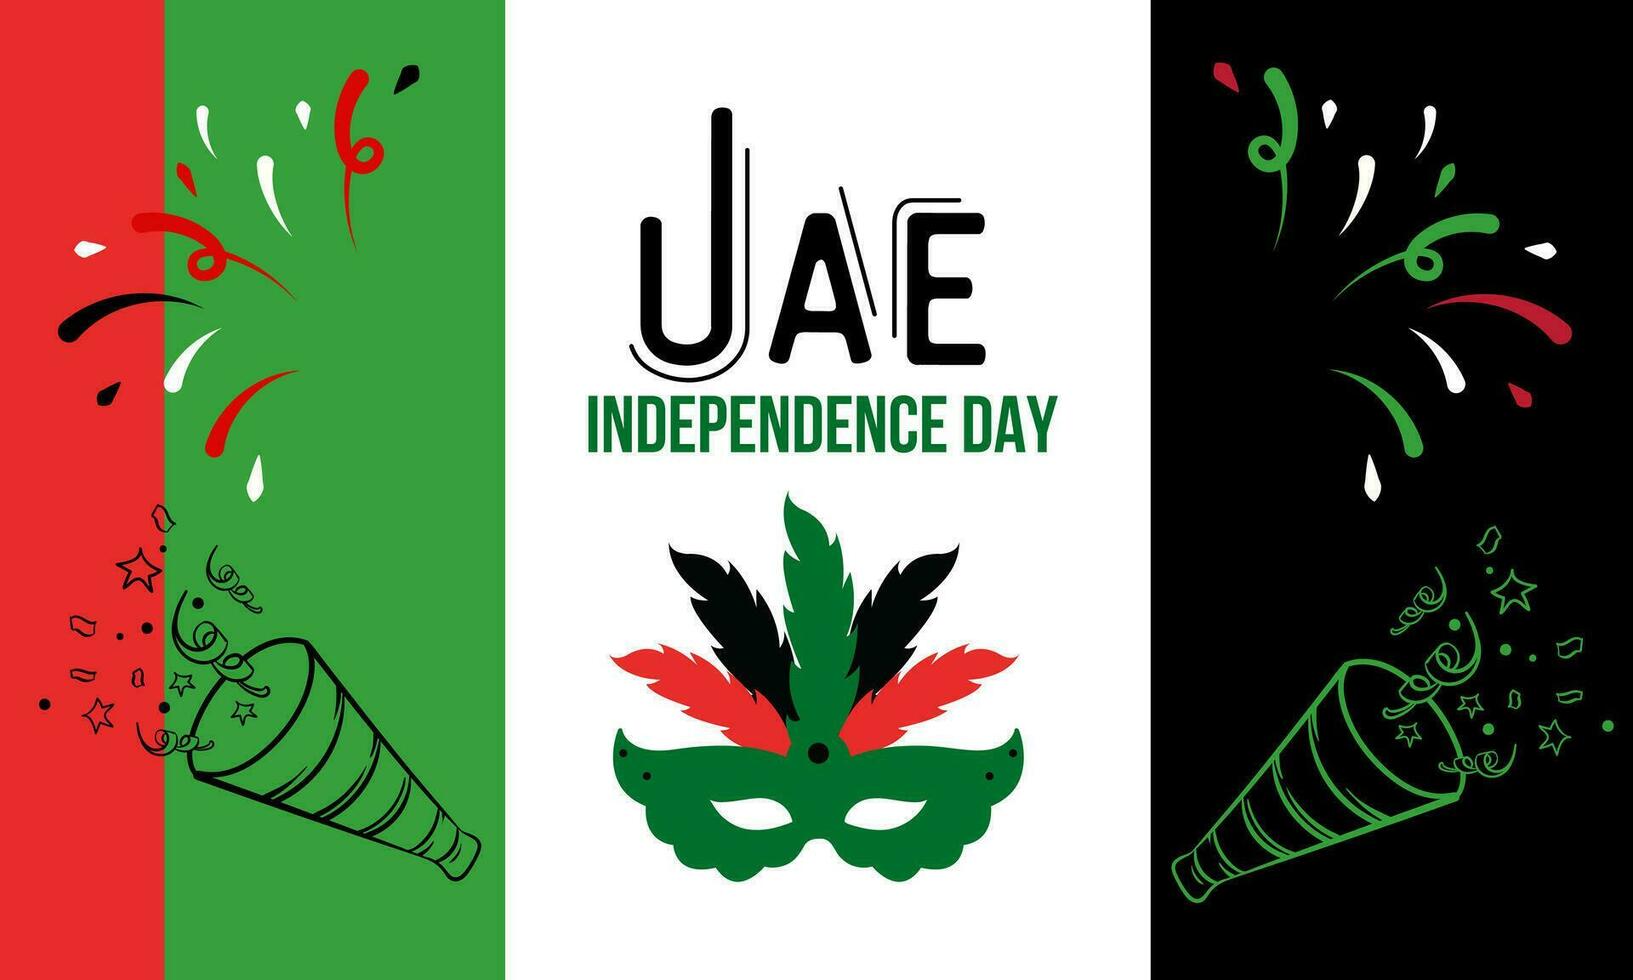 UAE national day banner for independence day anniversary. arab emirates modern geometric retro abstract design. vector